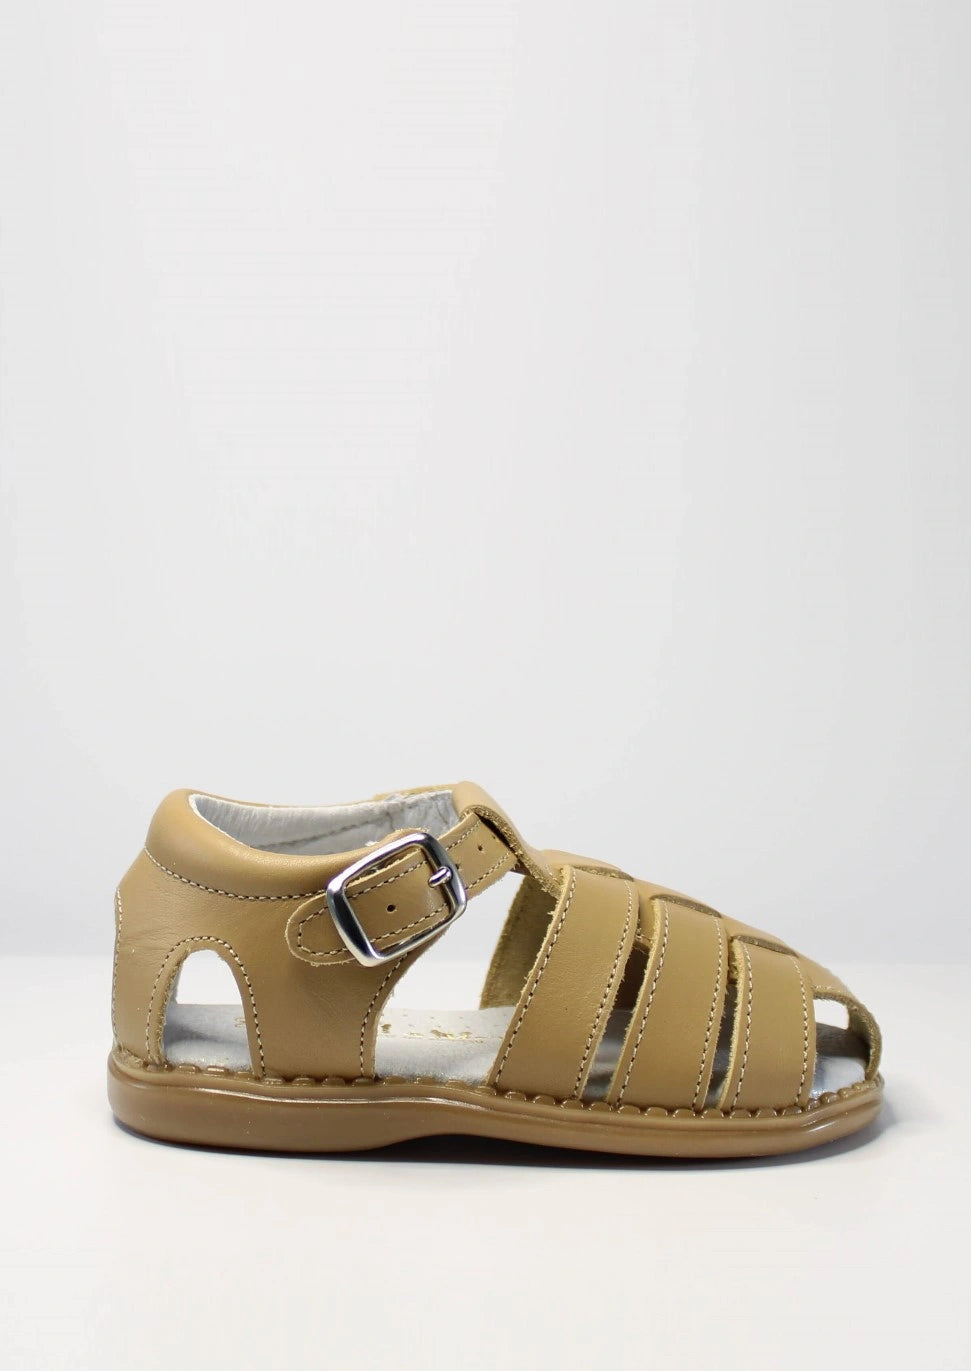 camel sandals by aladino from tors childrens wear